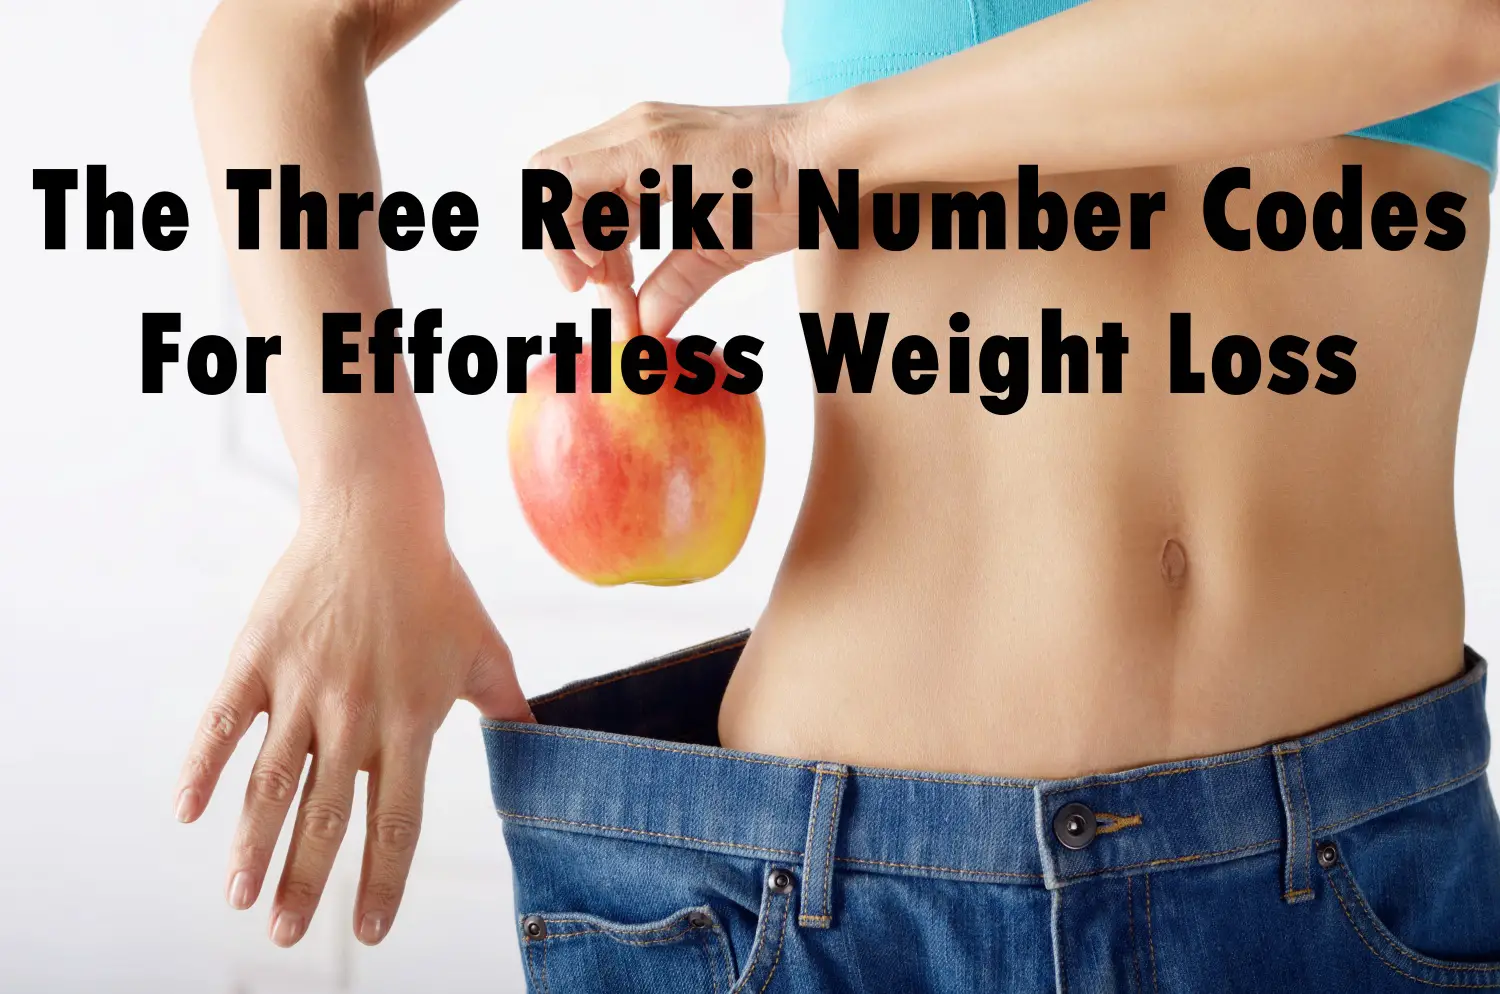 The Three Reiki Number Codes For Effortless Weight Loss